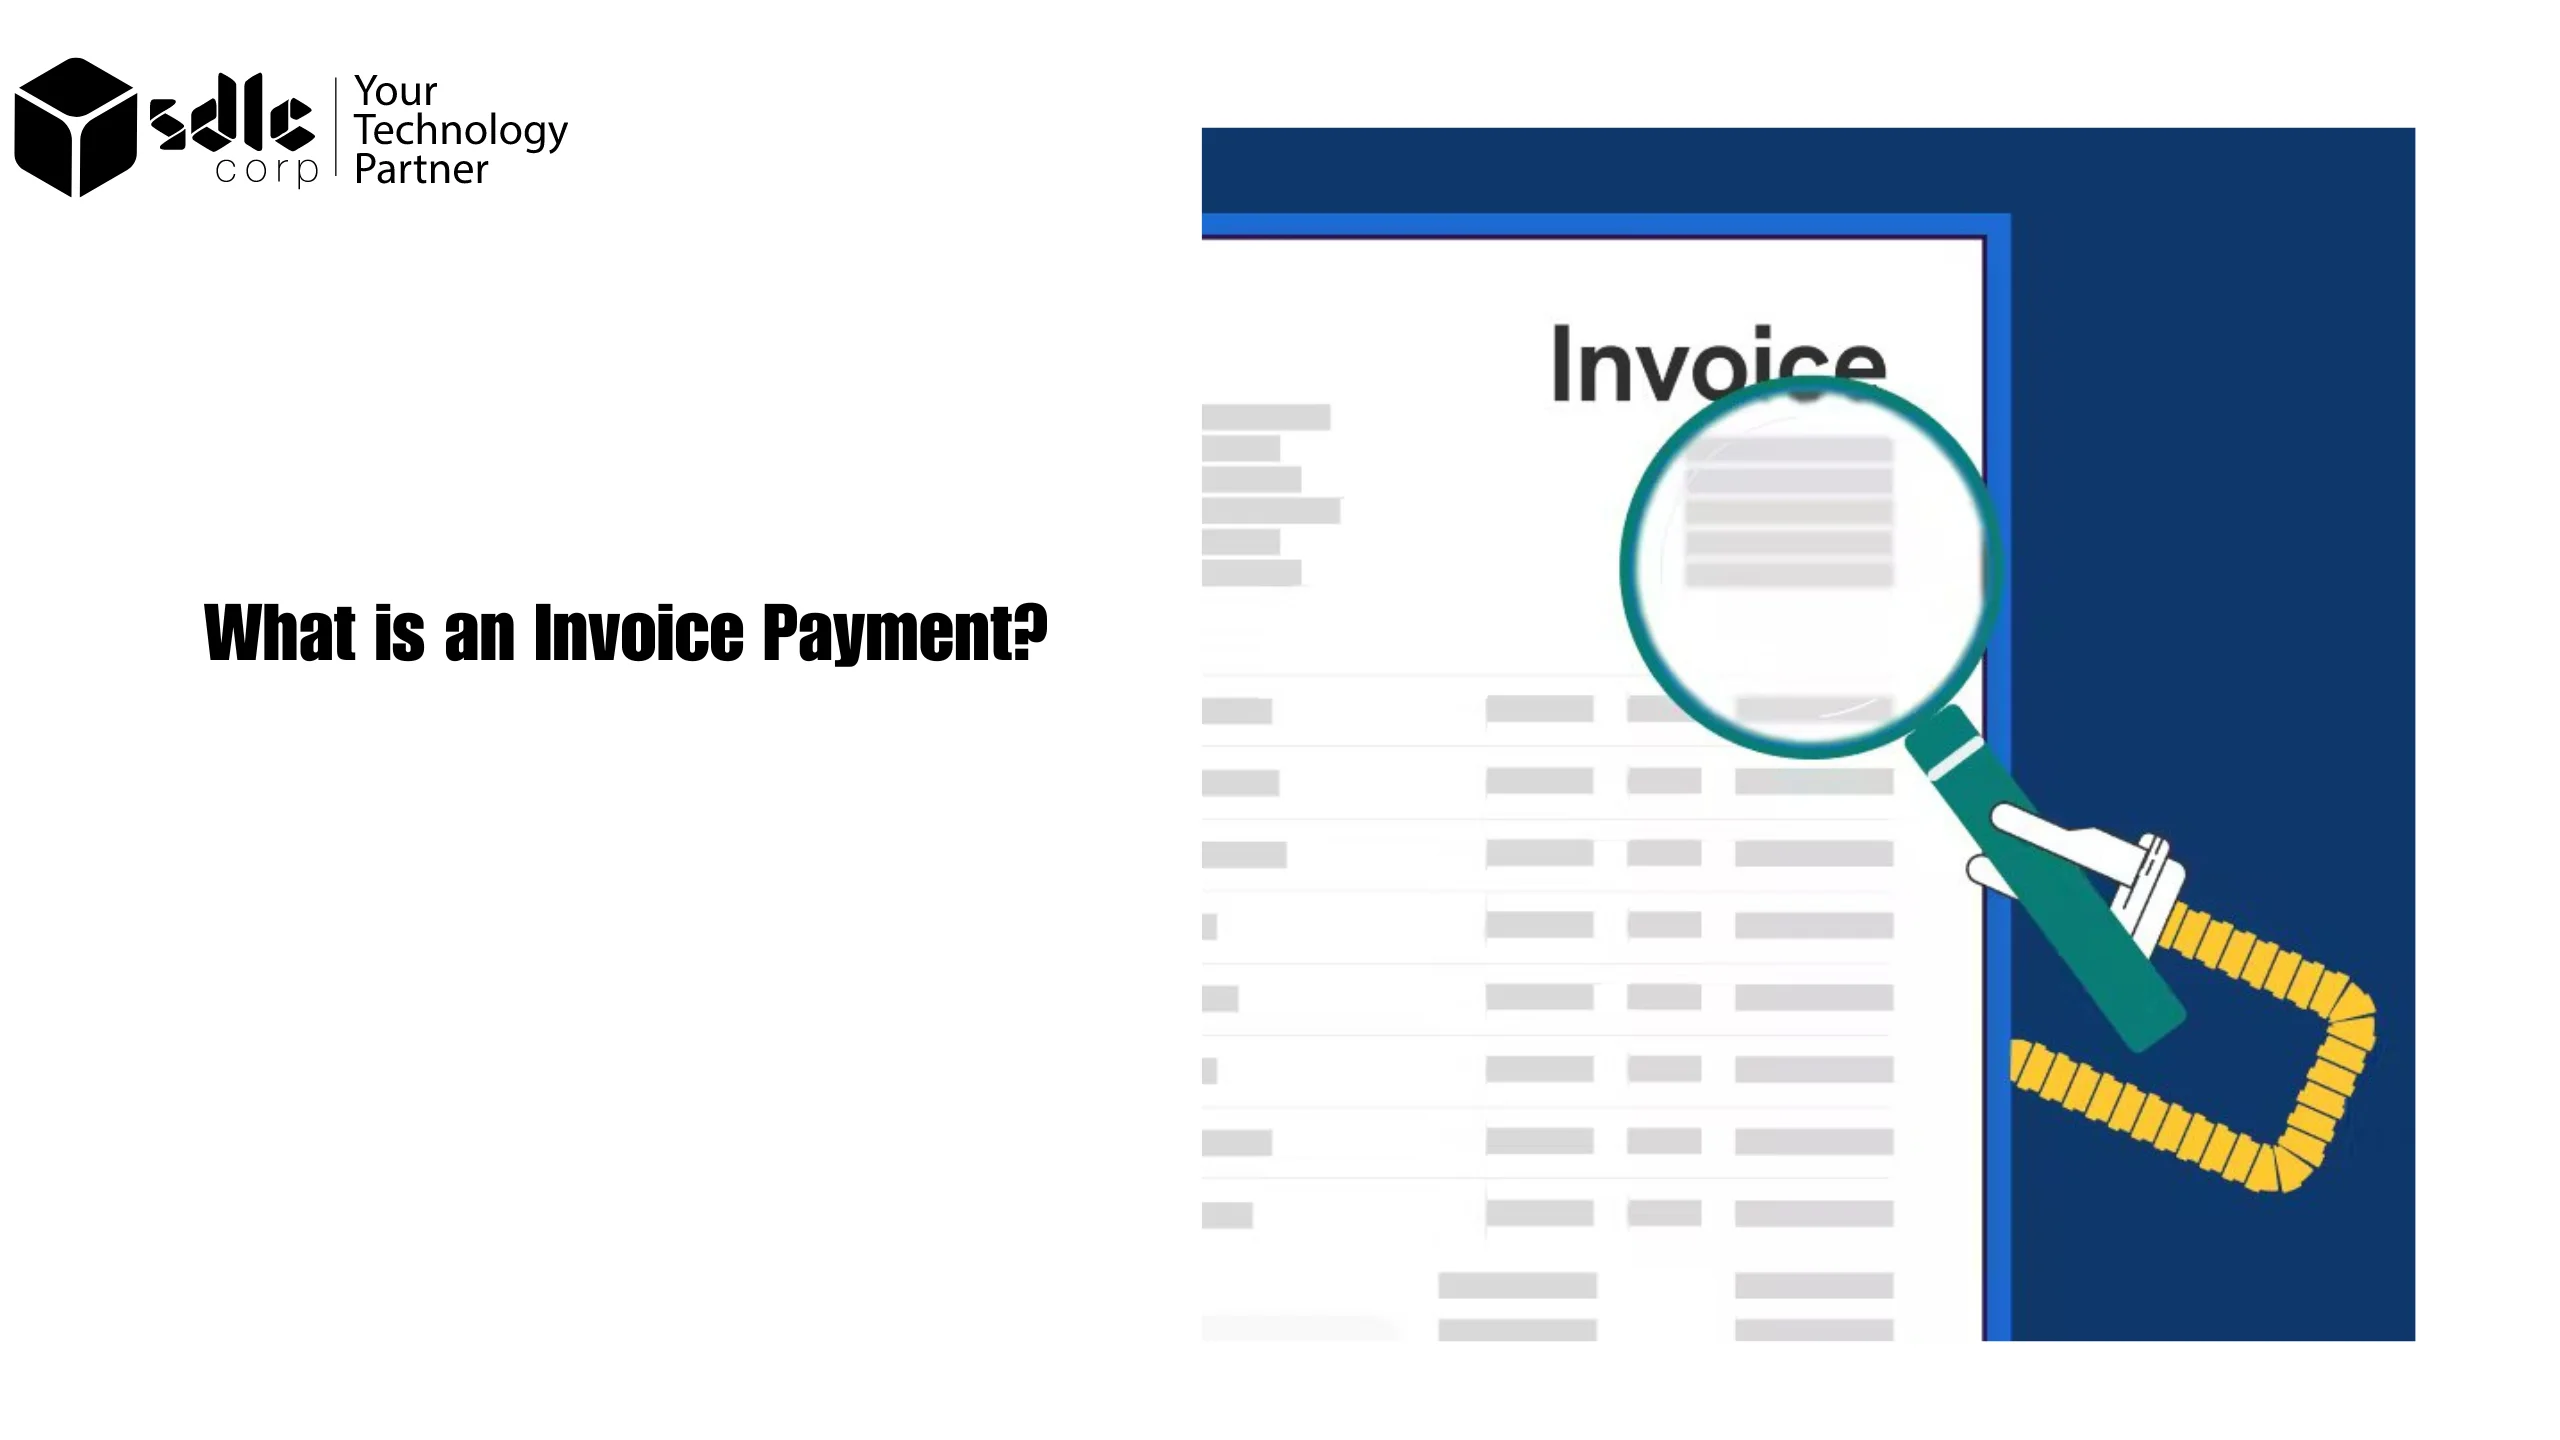 A sales invoice processing flowchart is a visual representation of the steps involved in managing